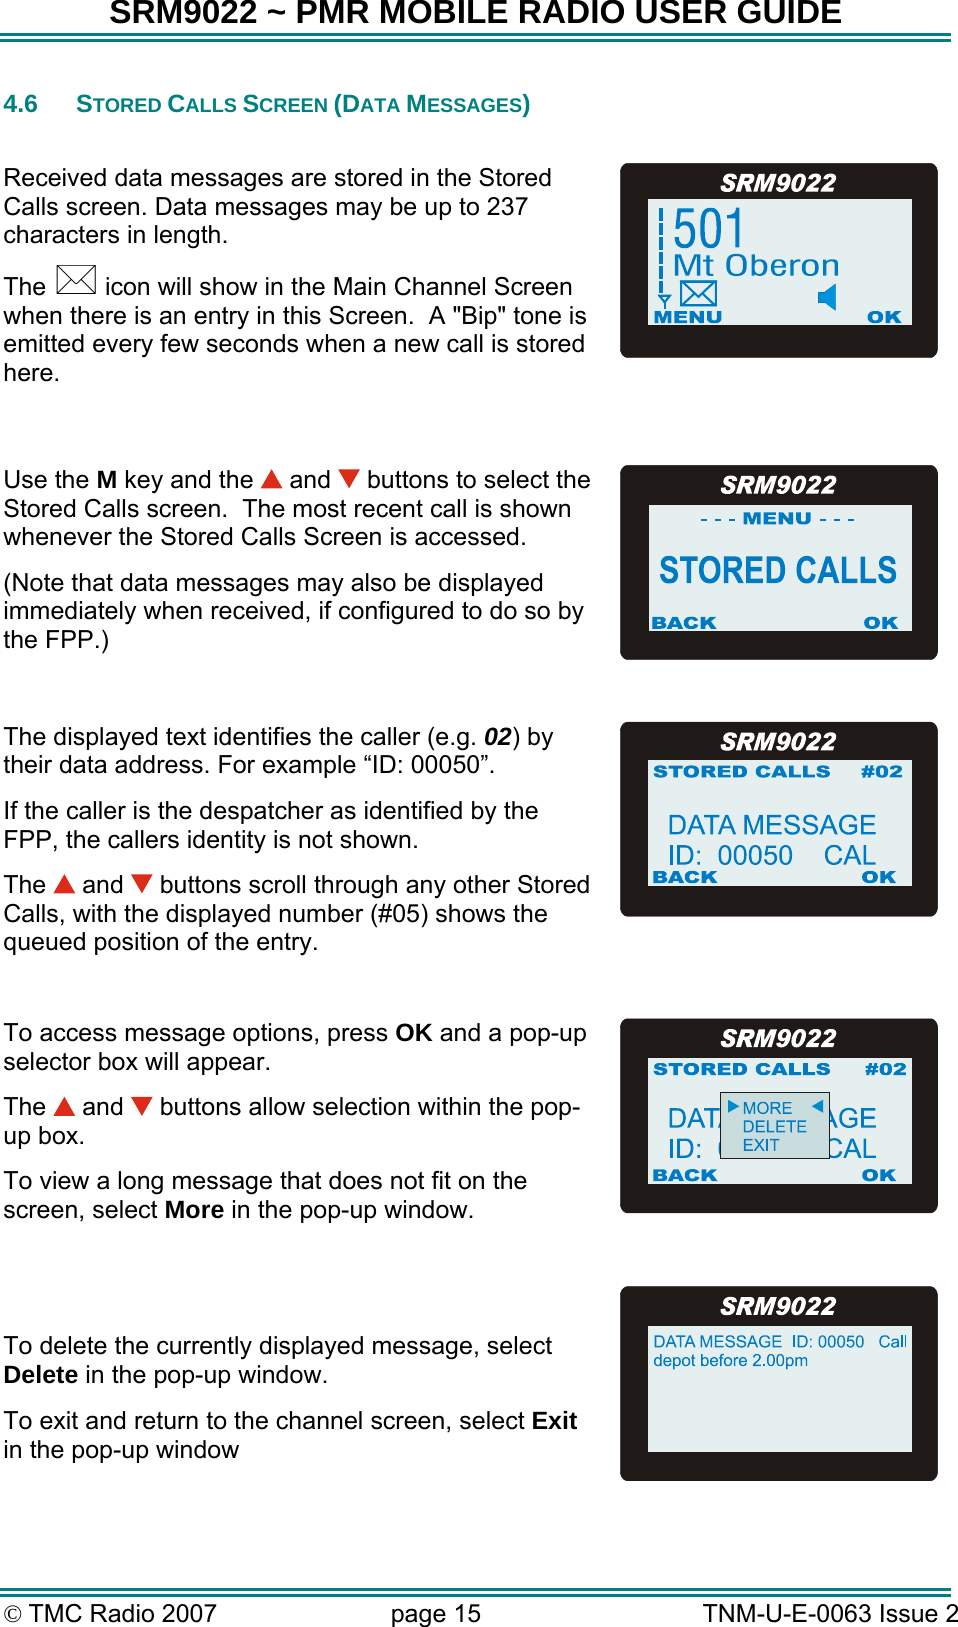 SRM9022 ~ PMR MOBILE RADIO USER GUIDE © TMC Radio 2007  page 15   TNM-U-E-0063 Issue 2 4.6 STORED CALLS SCREEN (DATA MESSAGES)  Received data messages are stored in the Stored Calls screen. Data messages may be up to 237 characters in length. The   icon will show in the Main Channel Screen when there is an entry in this Screen.  A &quot;Bip&quot; tone is emitted every few seconds when a new call is stored here.      Use the M key and the   and   buttons to select the Stored Calls screen.  The most recent call is shown whenever the Stored Calls Screen is accessed. (Note that data messages may also be displayed immediately when received, if configured to do so by the FPP.)  The displayed text identifies the caller (e.g. 02) by their data address. For example “ID: 00050”.   If the caller is the despatcher as identified by the FPP, the callers identity is not shown. The   and   buttons scroll through any other Stored Calls, with the displayed number (#05) shows the queued position of the entry.  To access message options, press OK and a pop-up selector box will appear. The   and   buttons allow selection within the pop-up box.  To view a long message that does not fit on the screen, select More in the pop-up window.   To delete the currently displayed message, select Delete in the pop-up window. To exit and return to the channel screen, select Exit in the pop-up window   